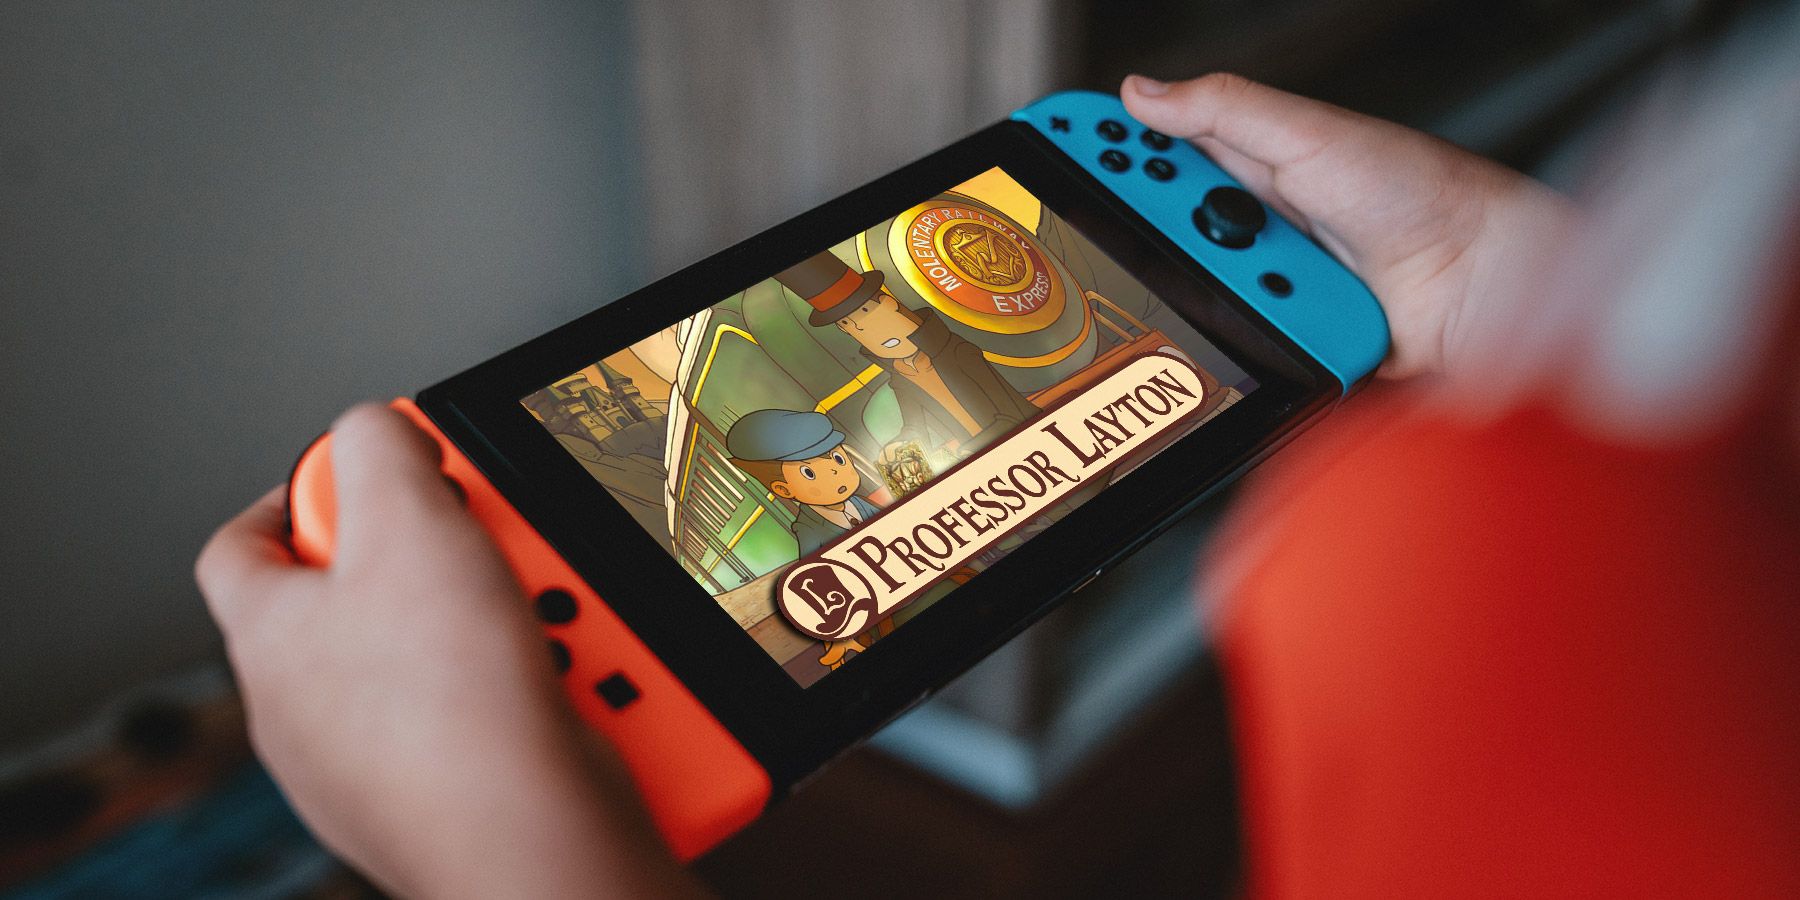 Professor Layton and The New World of Steam for Nintendo Switch - Sales,  Wiki, Release Dates, Review, Cheats, Walkthrough